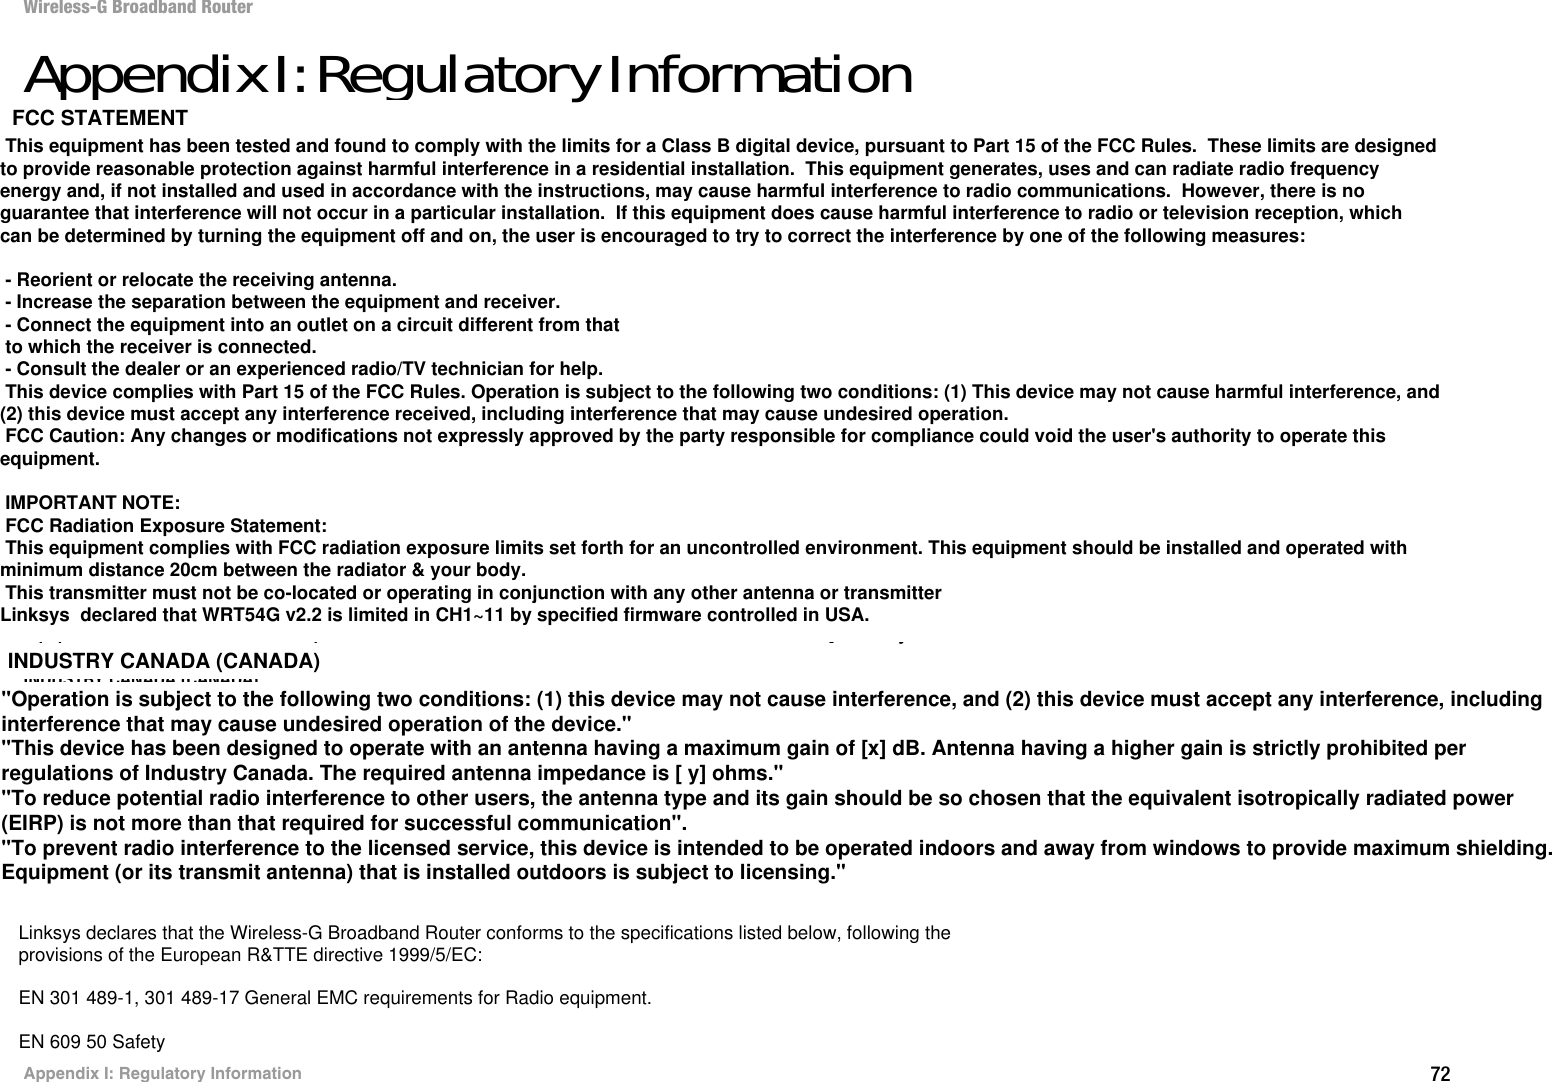 72Appendix I: Regulatory InformationWireless-G Broadband RouterAppendix I: Regulatory InformationFCC STATEMENTThis product has been tested and complies with the specifications for a Class B digital device, pursuant to Part 15 of the FCC Rules. These limits are designed to provide reasonable protection against harmful interference in a residential installation. This equipment generates, uses, and can radiate radio frequency energy and, if not installed and used according to the instructions, may cause harmful interference to radio communications. However, there is no guarantee that interference will not occur in a particular installation. If this equipment does cause harmful interference to radio or television reception, which is found by turning the equipment off and on, the user is encouraged to try to correct the interference by one or more of the following measures:Reorient or relocate the receiving antennaIncrease the separation between the equipment or devicesConnect the equipment to an outlet other than the receiver&apos;sConsult a dealer or an experienced radio/TV technician for assistanceFCC Radiation Exposure StatementThis equipment complies with FCC radiation exposure limits set forth for an uncontrolled environment.  This equipment should be installed and operated with minimum distance 20cm between the radiator and your body.INDUSTRY CANADA (CANADA)This Class B digital apparatus complies with Canadian ICES-003.Cet appareil numérique de la classe B est conforme à la norme NMB-003 du Canada.The use of this device in a system operating either partially or completely outdoors may require the user to obtain a license for the system according to the Canadian regulations.EC DECLARATION OF CONFORMITY (EUROPE)Linksys declares that the Wireless-G Broadband Router conforms to the specifications listed below, following the provisions of the European R&amp;TTE directive 1999/5/EC: EN 301 489-1, 301 489-17 General EMC requirements for Radio equipment.EN 609 50 SafetyEC DECLARATION OF CONFORMITY (EUROPE)Linksys declares that the Wireless-G Broadband Router conforms to the specifications listed below, following theprovisions of the European R&amp;TTE directive 1999/5/EC:EN 301 489-1, 301 489-17 General EMC requirements for Radio equipment.EN 609 50 SafetyTo prevent radio interference to the licenced service, this device is intended to be operated indoors and away from windows to provide maximum shielding. Equipment (or its transmit antenna) that is installed outdoors is subject to licensing This equipment has been tested and found to comply with the limits for a Class B digital device, pursuant to Part 15 of the FCC Rules.  These limits are designed to provide reasonable protection against harmful interference in a residential installation.  This equipment generates, uses and can radiate radio frequency energy and, if not installed and used in accordance with the instructions, may cause harmful interference to radio communications.  However, there is no guarantee that interference will not occur in a particular installation.  If this equipment does cause harmful interference to radio or television reception, which can be determined by turning the equipment off and on, the user is encouraged to try to correct the interference by one of the following measures: - Reorient or relocate the receiving antenna. - Increase the separation between the equipment and receiver. - Connect the equipment into an outlet on a circuit different from that to which the receiver is connected. - Consult the dealer or an experienced radio/TV technician for help. This device complies with Part 15 of the FCC Rules. Operation is subject to the following two conditions: (1) This device may not cause harmful interference, and (2) this device must accept any interference received, including interference that may cause undesired operation. FCC Caution: Any changes or modifications not expressly approved by the party responsible for compliance could void the user&apos;s authority to operate this equipment. IMPORTANT NOTE: FCC Radiation Exposure Statement: This equipment complies with FCC radiation exposure limits set forth for an uncontrolled environment. This equipment should be installed and operated with minimum distance 20cm between the radiator &amp; your body. This transmitter must not be co-located or operating in conjunction with any other antenna or transmitterLinksys  declared that WRT54G v2.2 is limited in CH1~11 by specified firmware controlled in USA.INDUSTRY CANADA (CANADA)FCC STATEMENT&quot;Operation is subject to the following two conditions: (1) this device may not cause interference, and (2) this device must accept any interference, including interference that may cause undesired operation of the device.&quot;&quot;This device has been designed to operate with an antenna having a maximum gain of [x] dB. Antenna having a higher gain is strictly prohibited per regulations of Industry Canada. The required antenna impedance is [ y] ohms.&quot; &quot;To reduce potential radio interference to other users, the antenna type and its gain should be so chosen that the equivalent isotropically radiated power (EIRP) is not more than that required for successful communication&quot;.&quot;To prevent radio interference to the licensed service, this device is intended to be operated indoors and away from windows to provide maximum shielding. Equipment (or its transmit antenna) that is installed outdoors is subject to licensing.&quot;